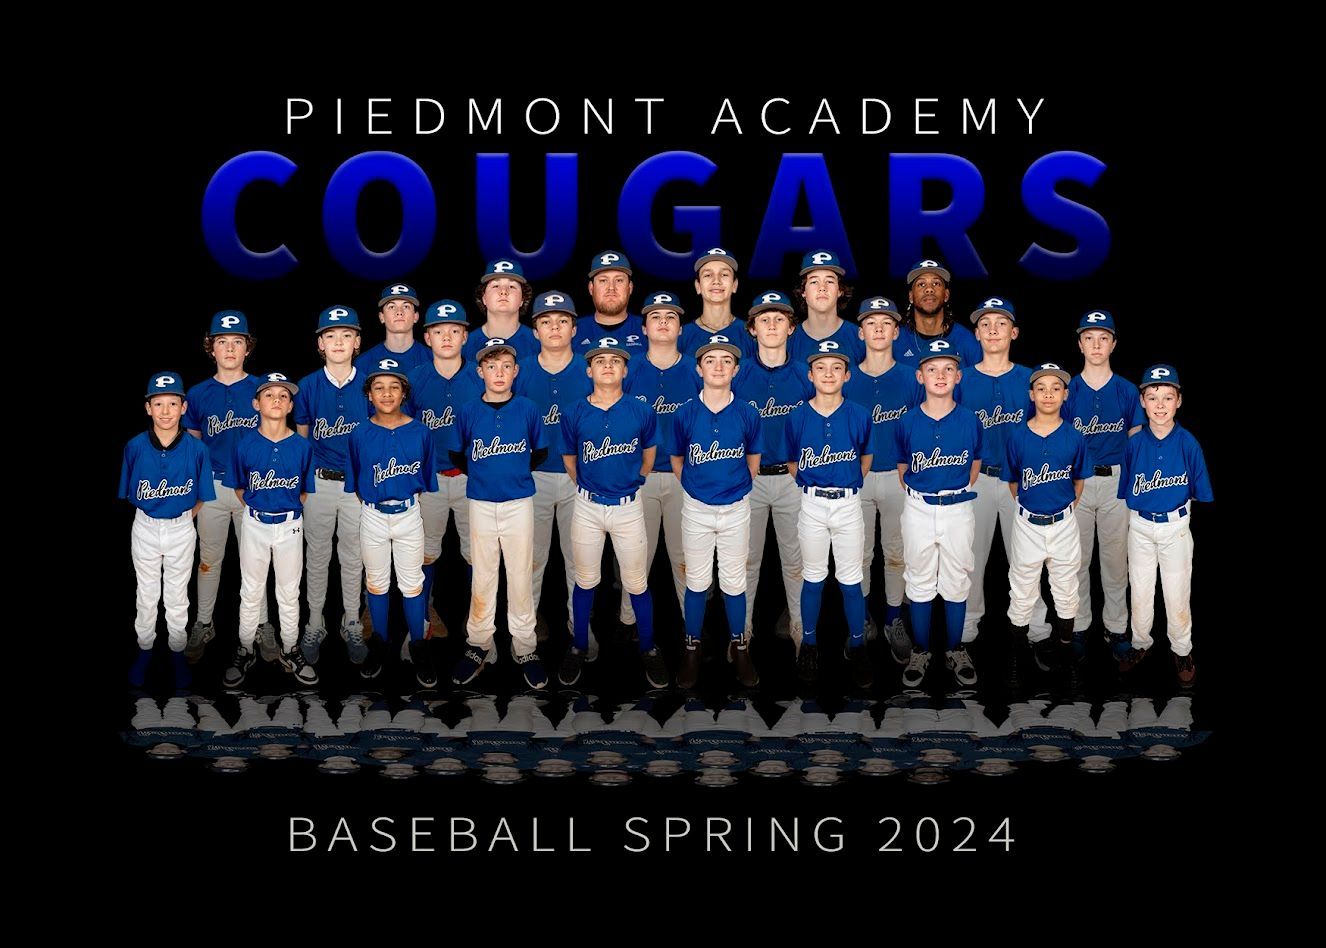 the piedmont academy cougars baseball team is posing for a team photo .